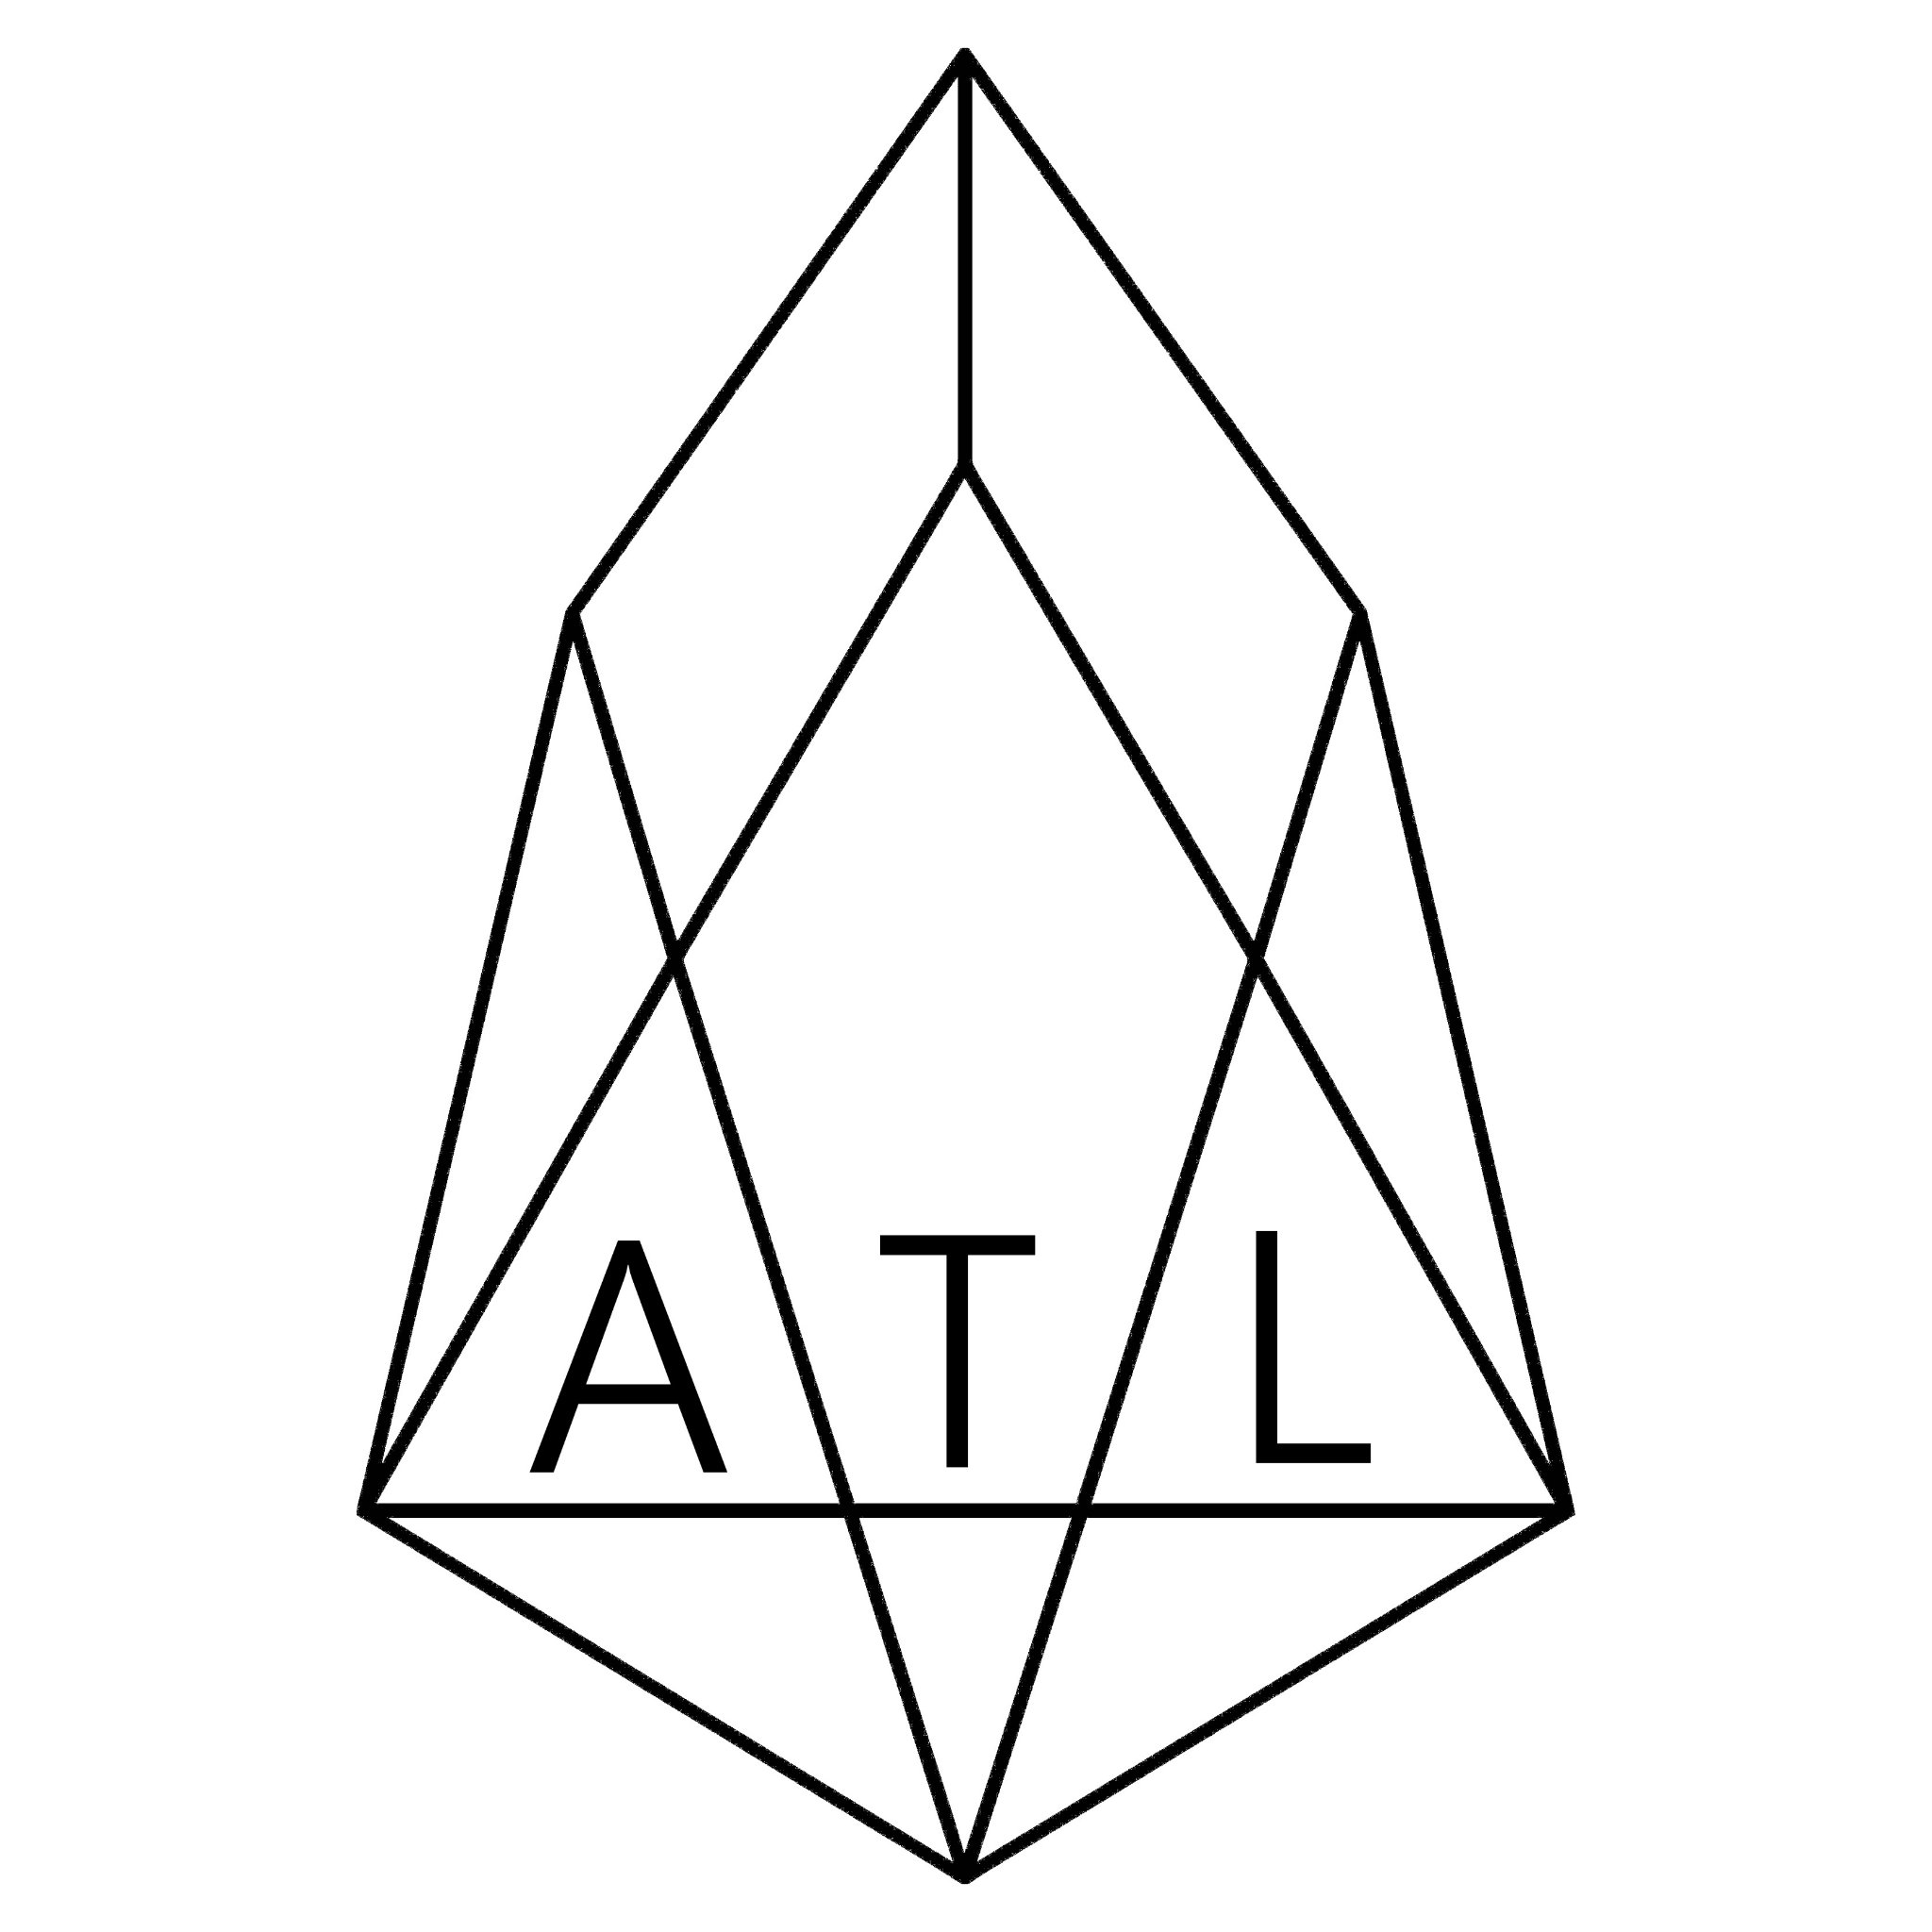 EOS Atlanta is a MeetUp to discuss and educate the community about the https://t.co/Vq2yX0OOs6 software and block chain technology.